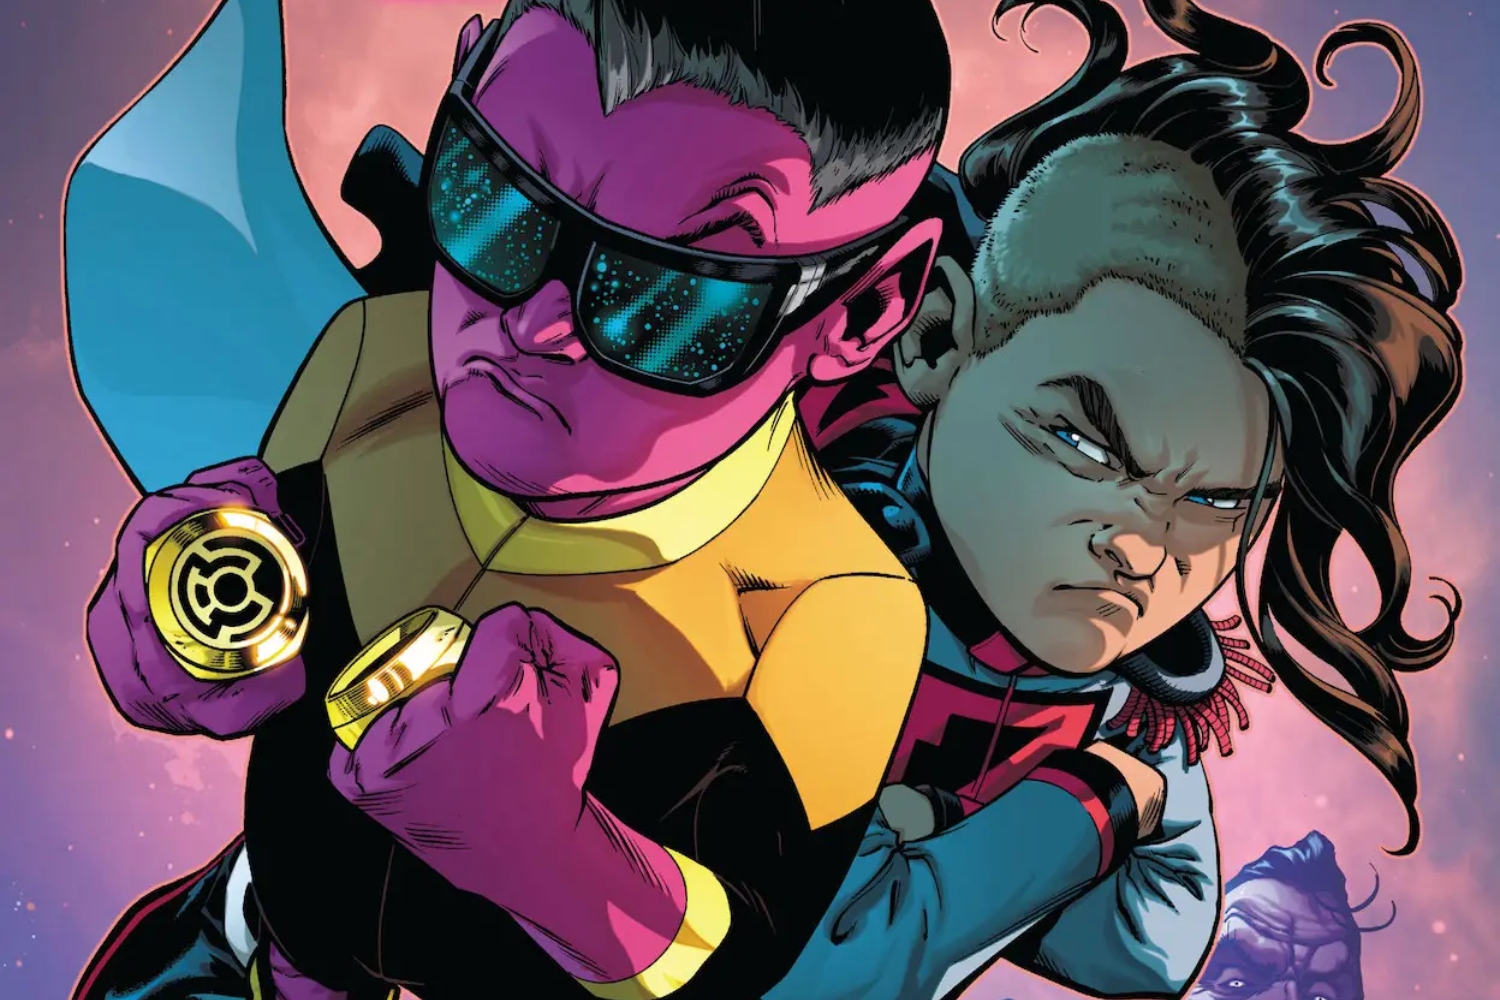 'Sinister Sons' #1 gives us two new bad boys to watch grow up